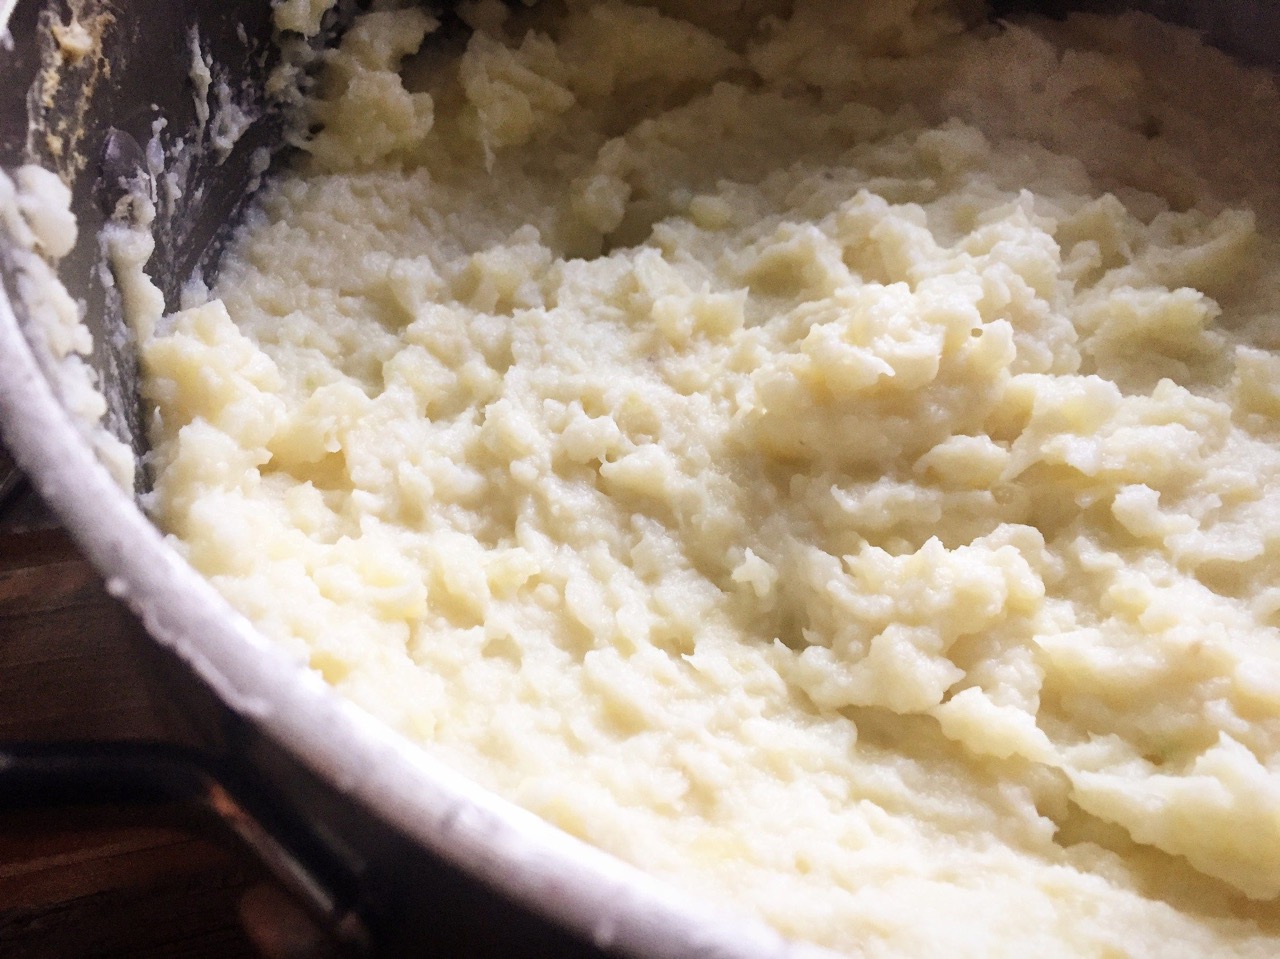 https://storables.com/wp-content/uploads/2023/07/how-to-make-mashed-cauliflower-without-a-food-processor-1690764287.jpeg